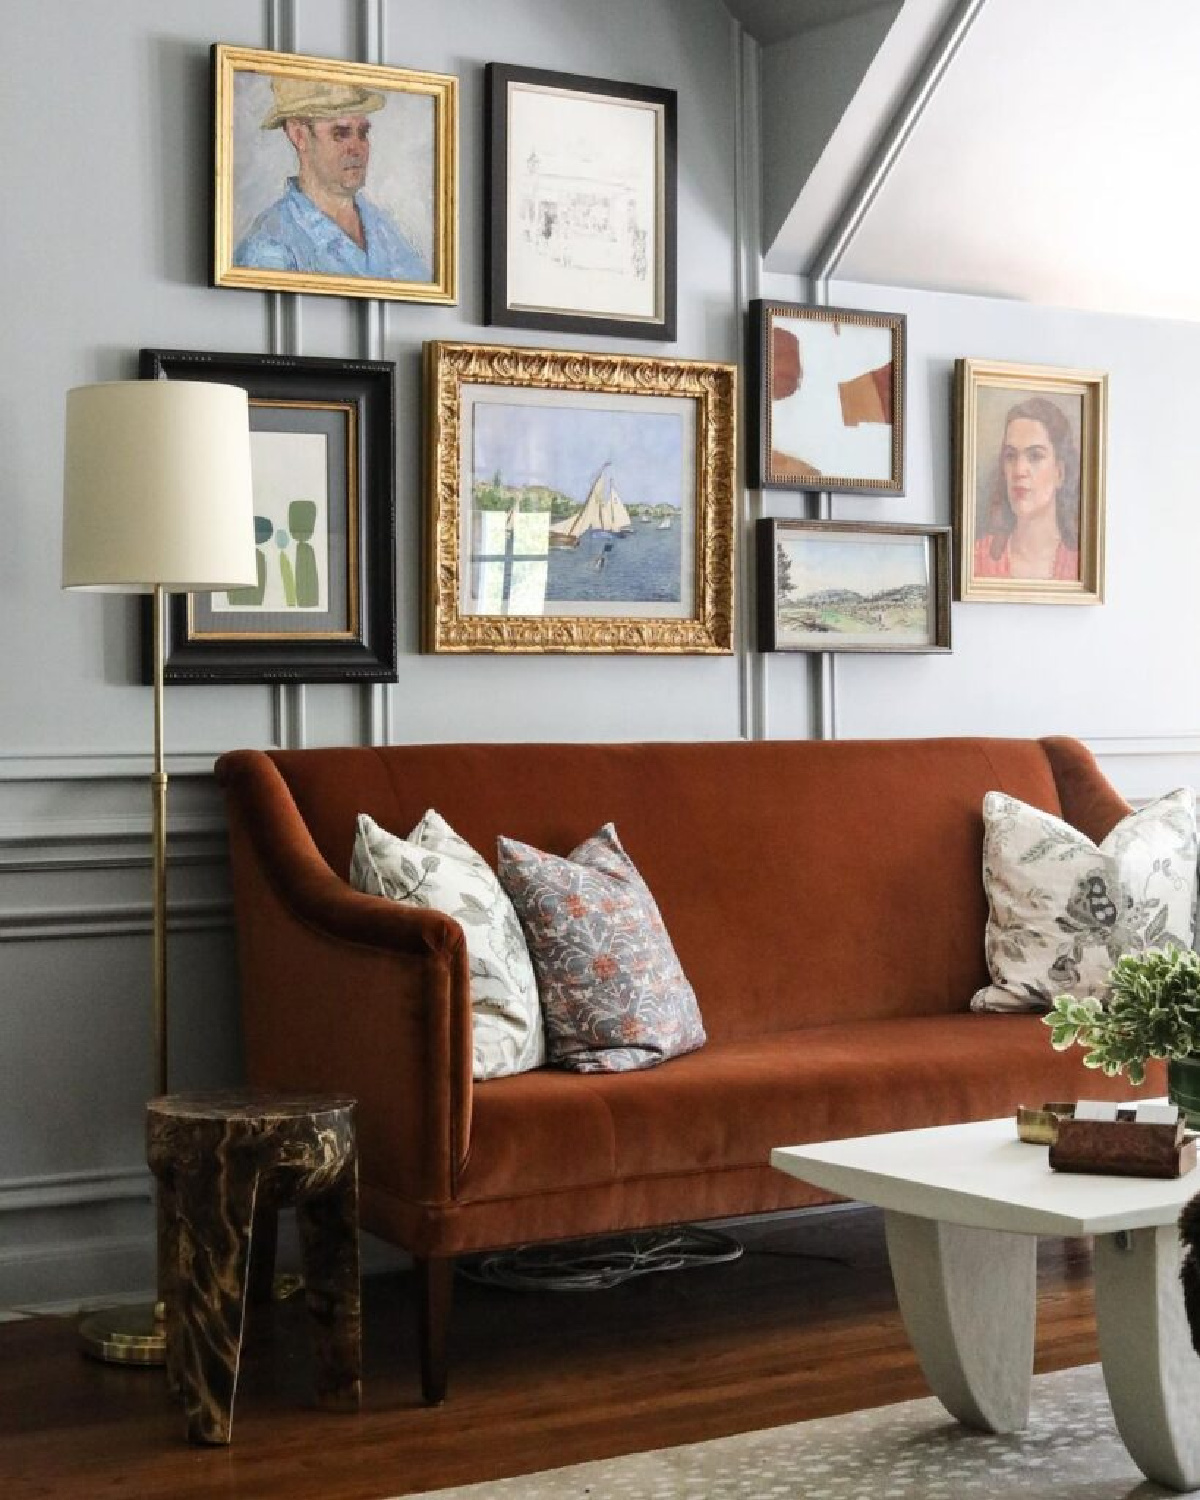 Park and Oak - beautiful pumpkin spice settee and gallery wall in an elegant interior with panel moldings. #gallerywalls #europeancountry #belgianstyle